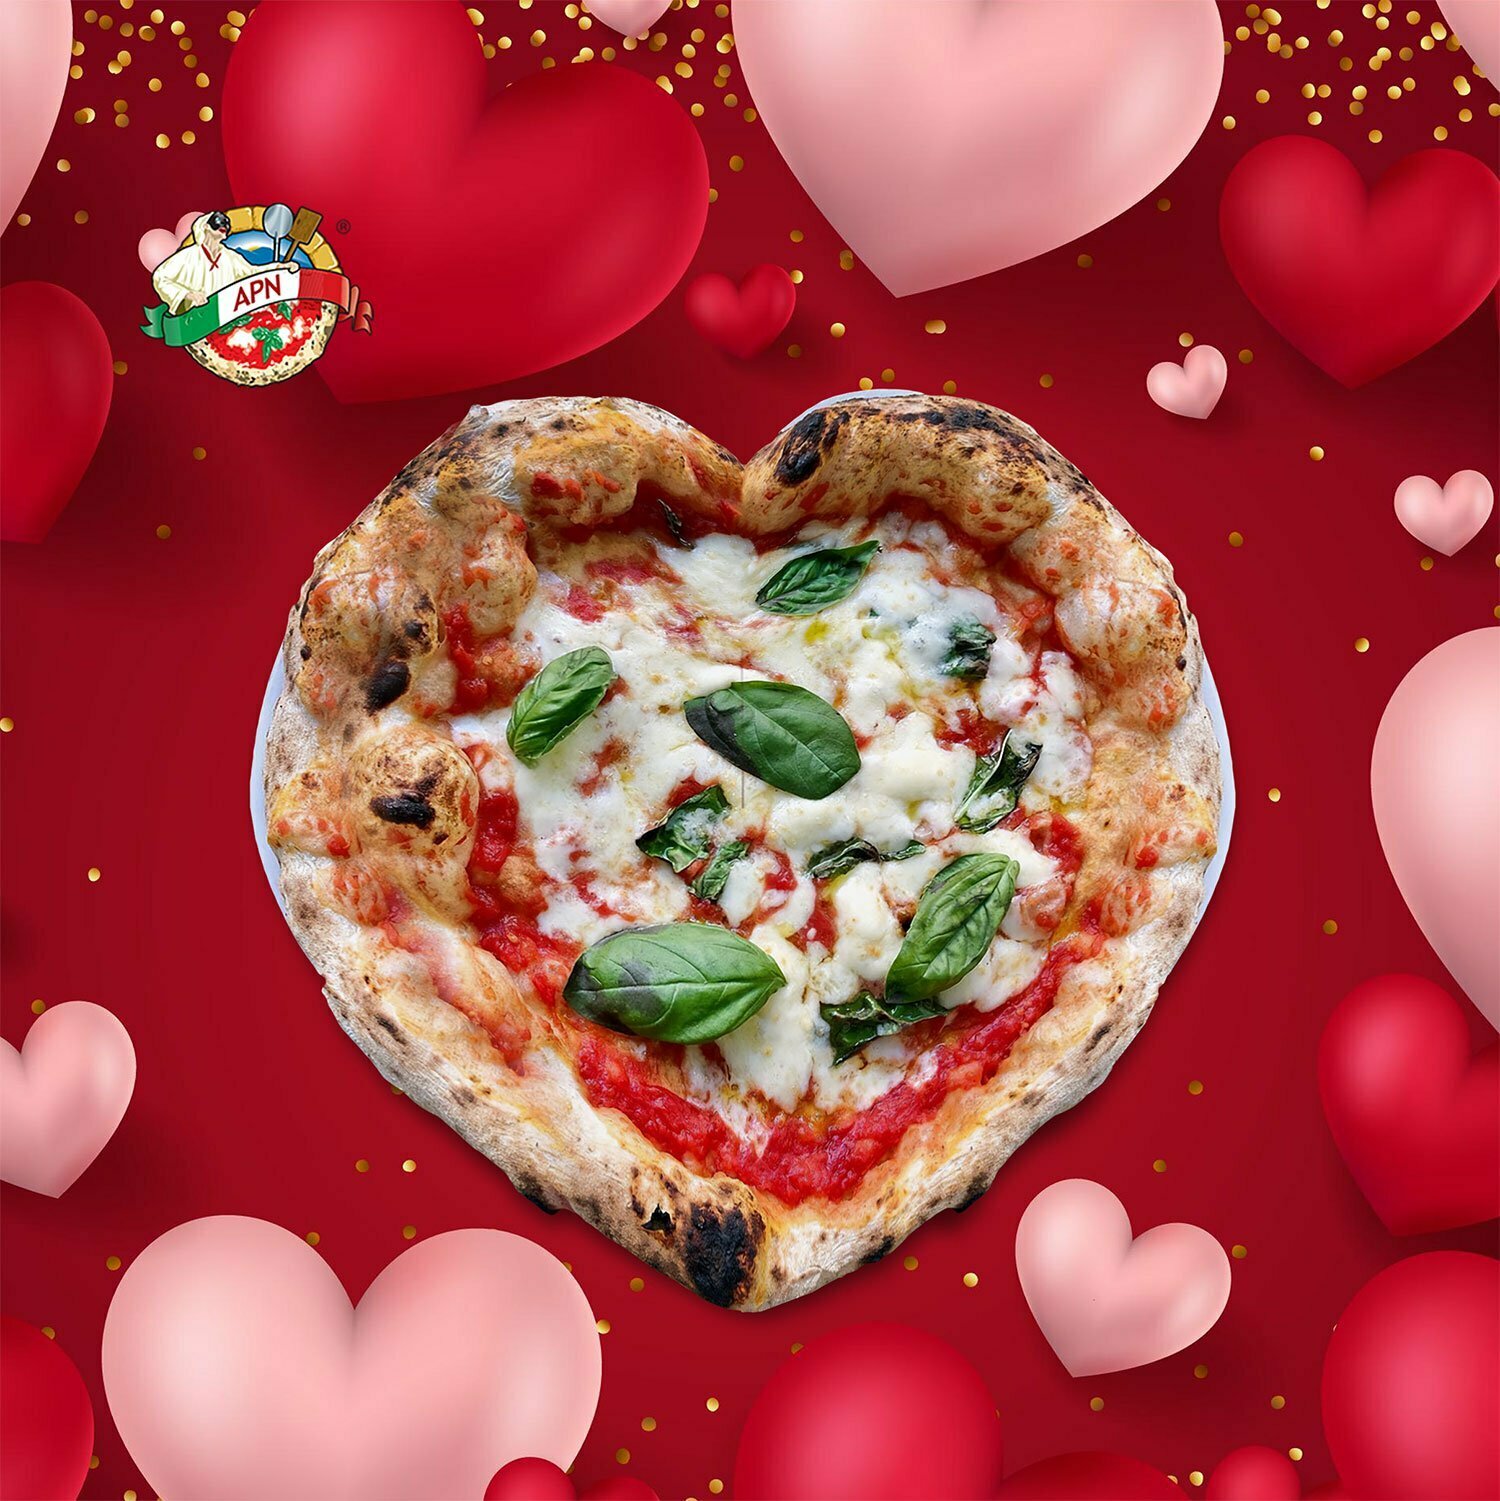 To st. Valentine with a pizza heart